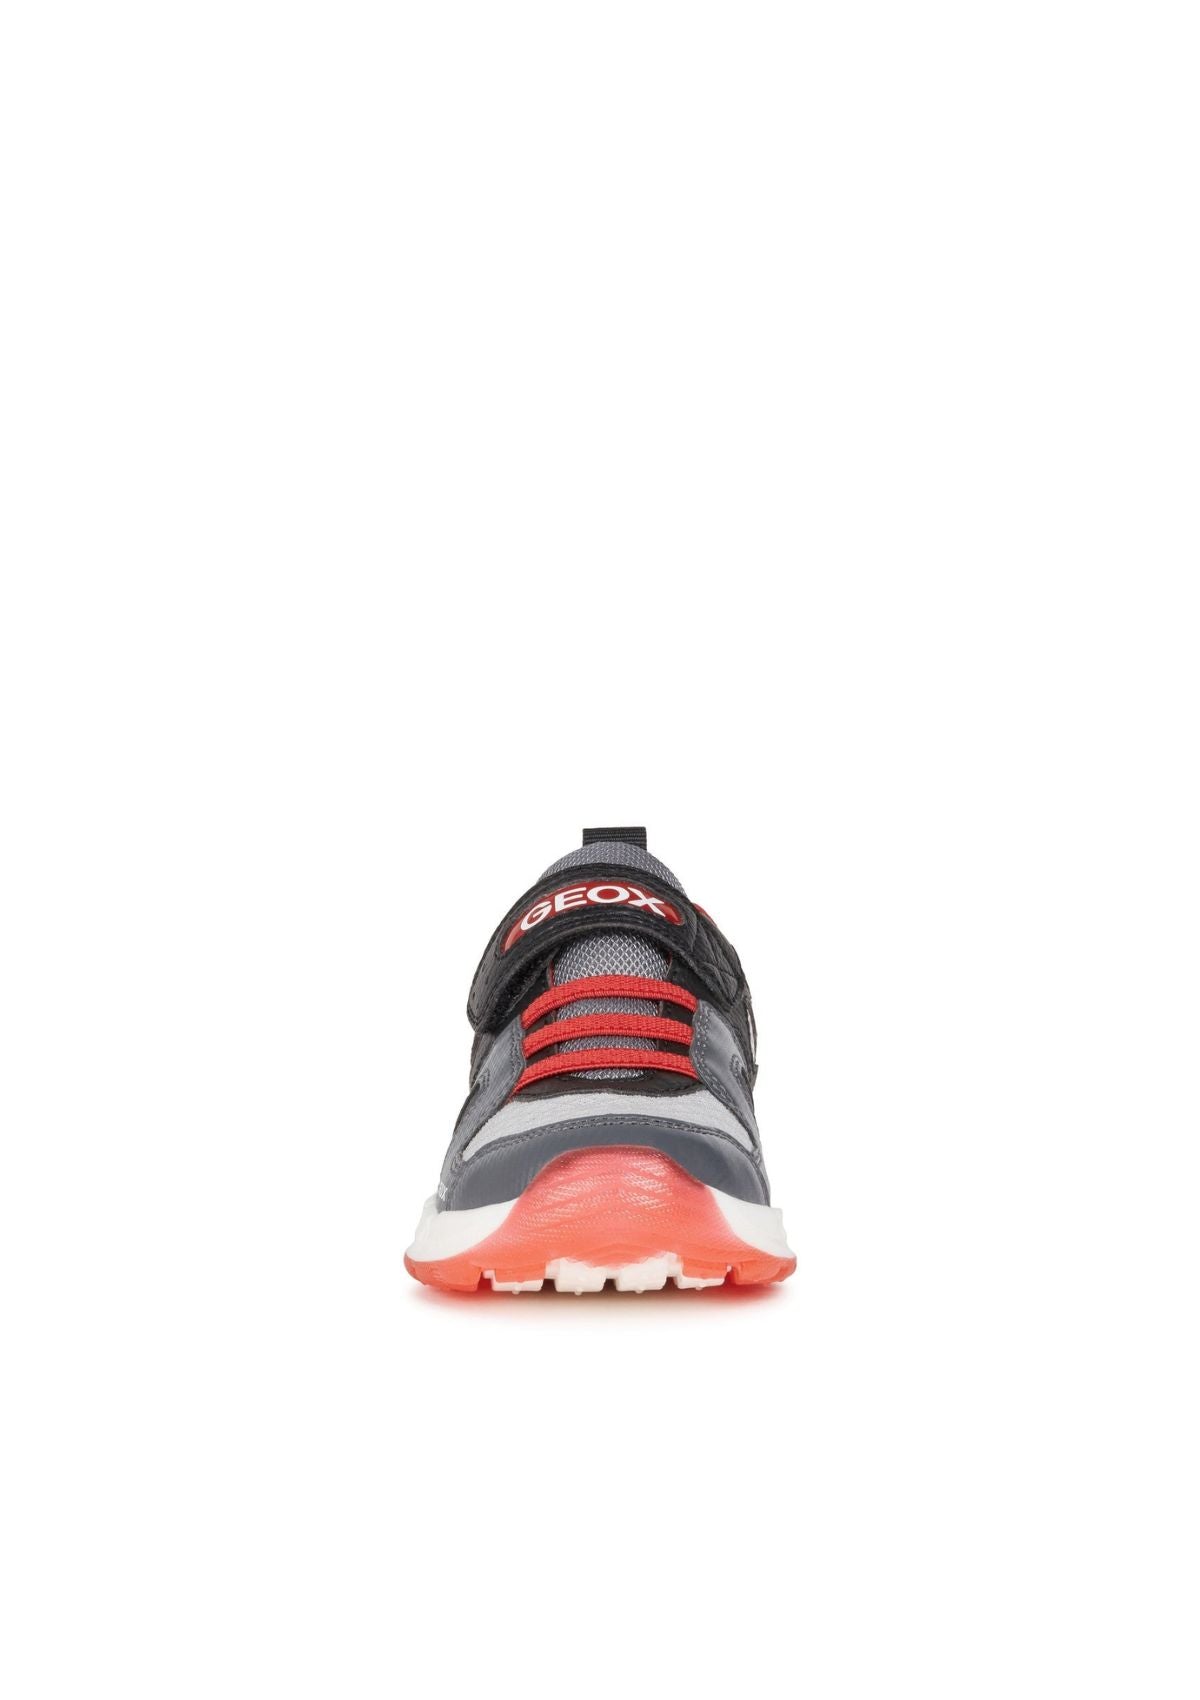 Geox Boys J SPAZIALE Grey Red front